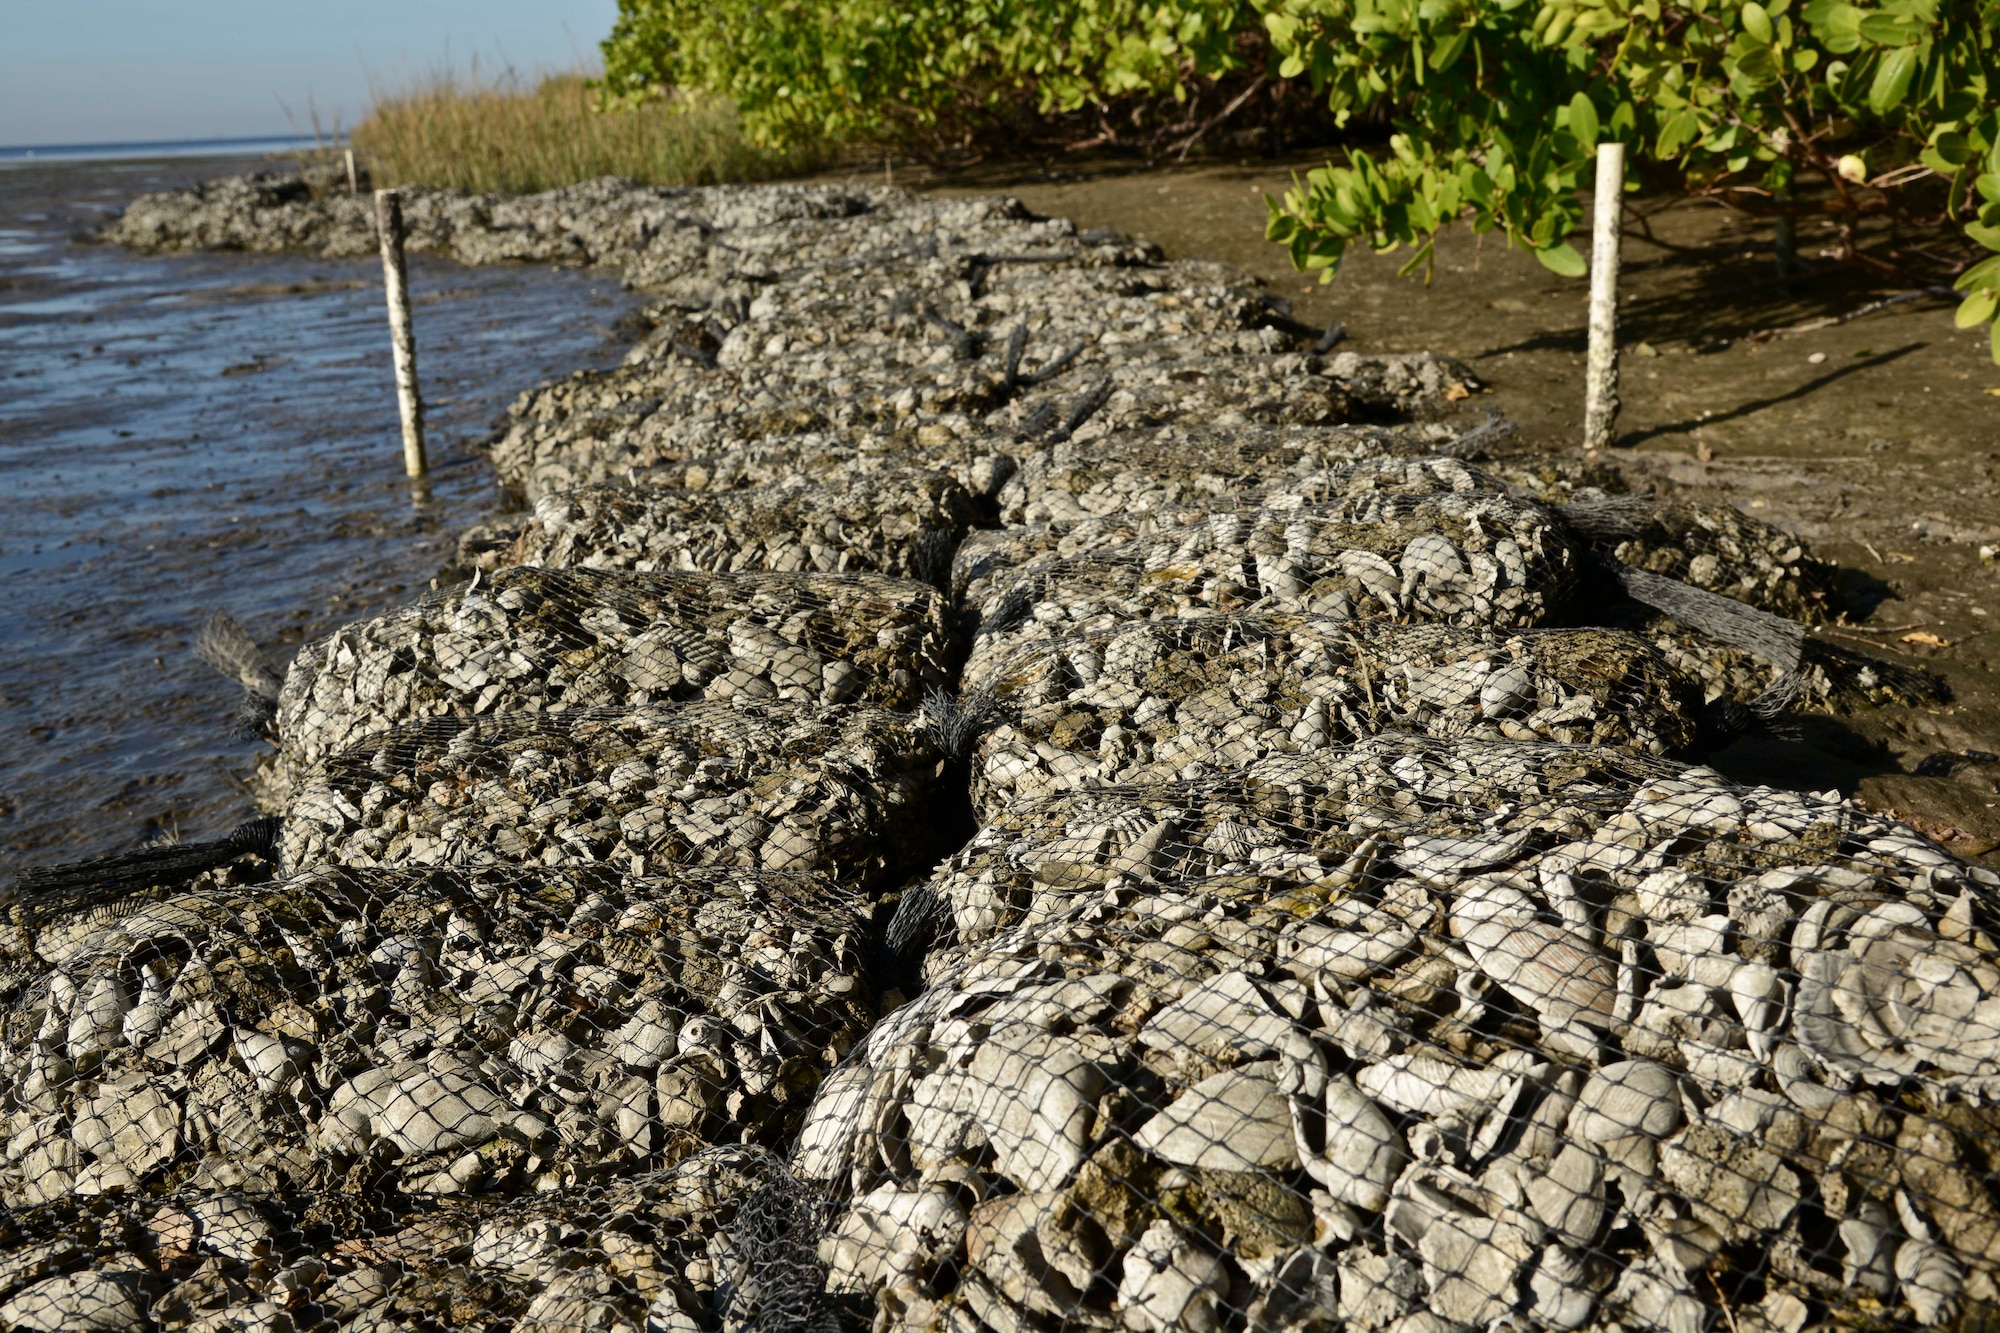 Bags of shells lay along the shoreline at MacDill Air Force Base, Fla., Dec. 11, 2015. Fourteen tons of shells were gathered, bagged, transported and used to build an oyster reef. (U.S. Air Force photo by Senior Airman Vernon L. Fowler Jr./Released)